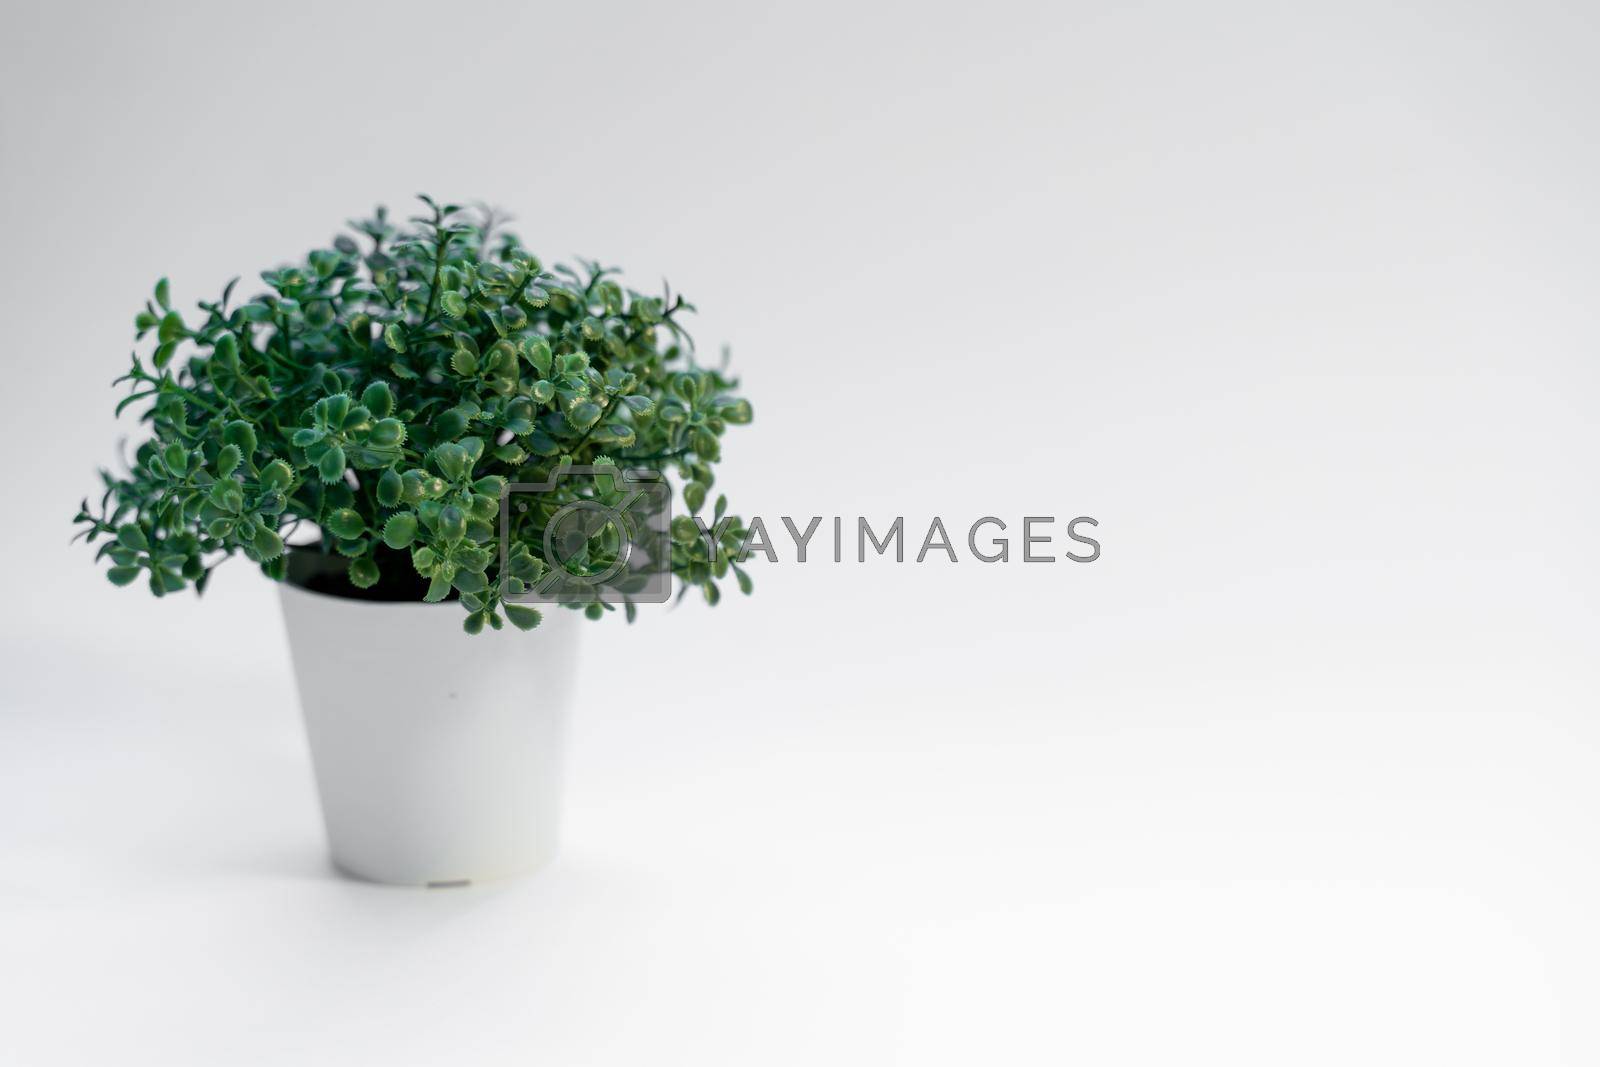 advertising concept with green succulent plant in pot on white background with copy space, side view.